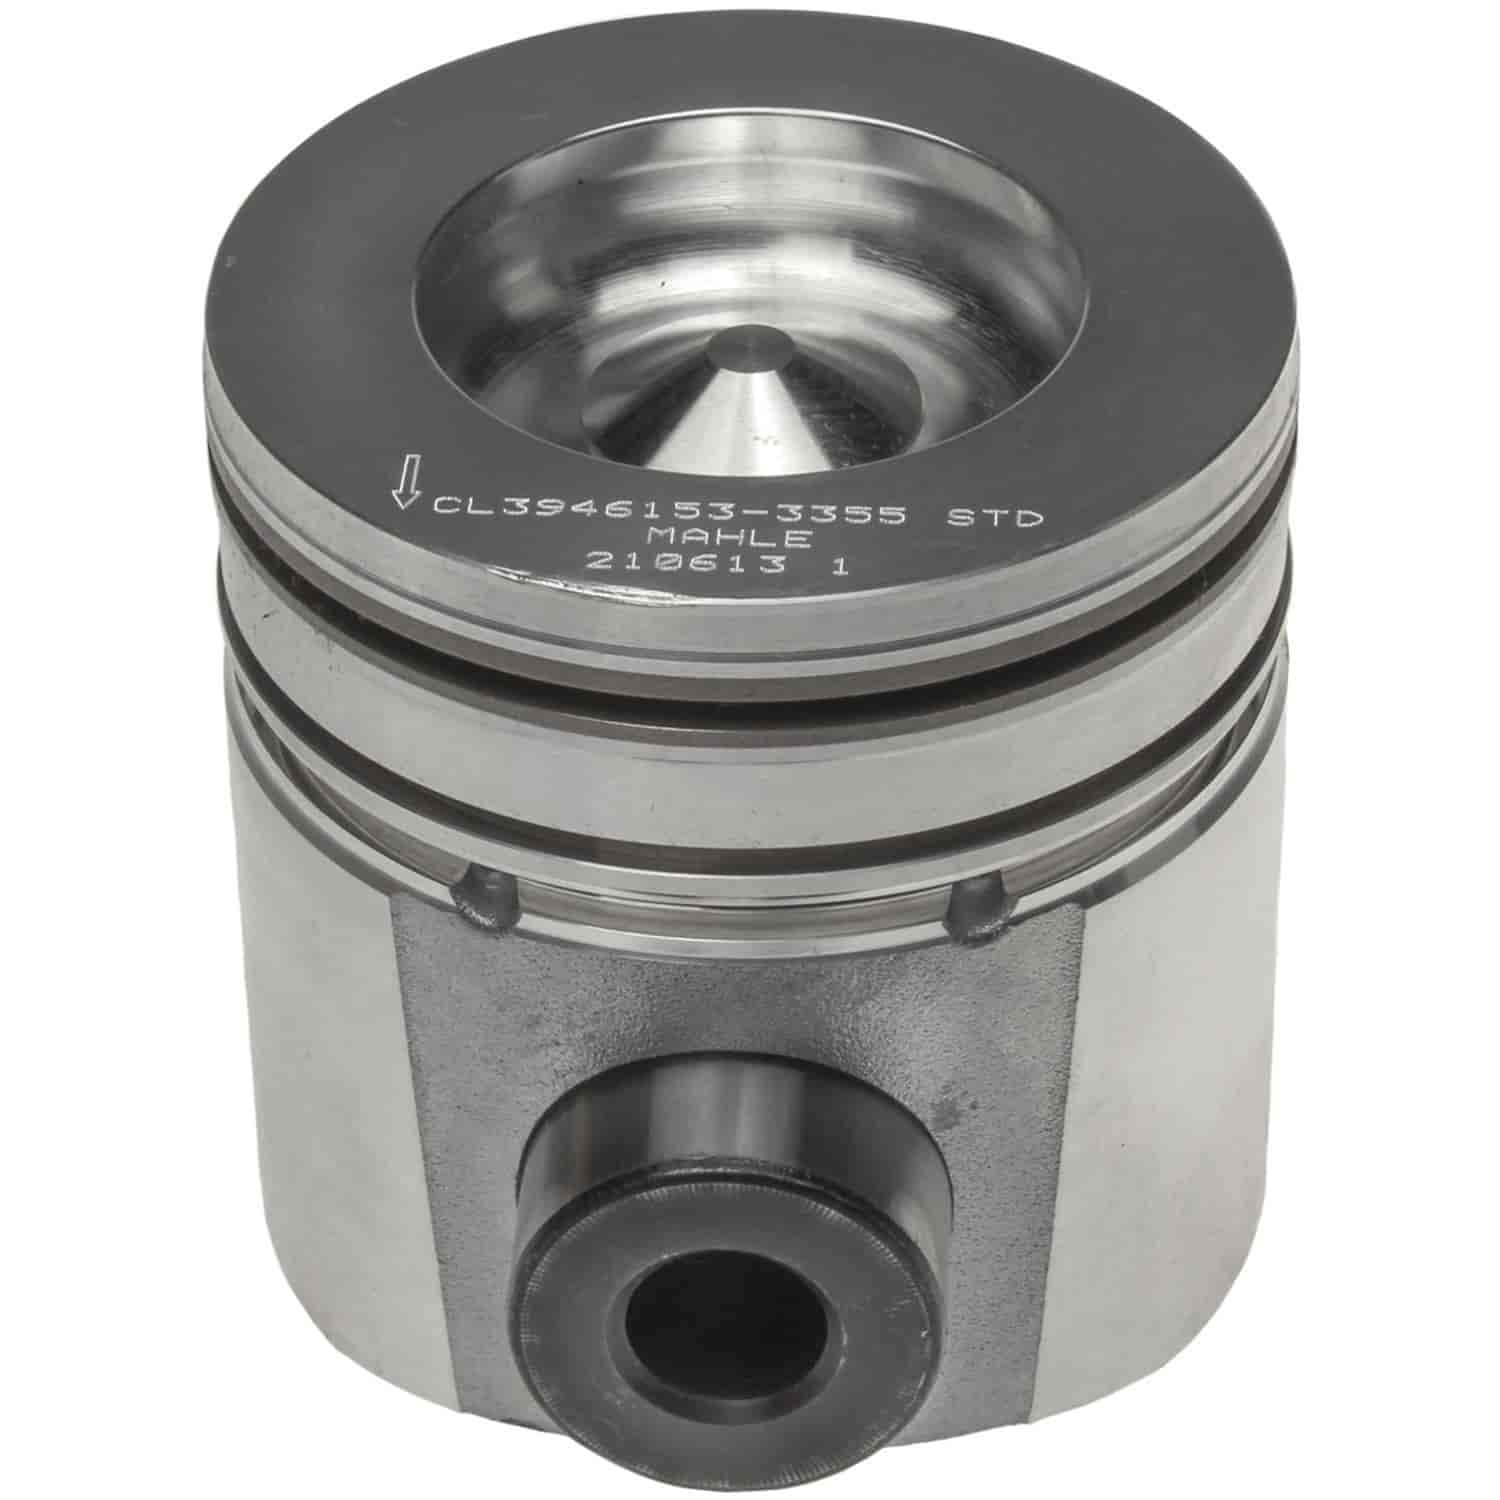 Piston and Rings Set 1998-2002 Dodge, Fits Cummins Diesel L6 5.9L with 4.056" Bore (+.040")